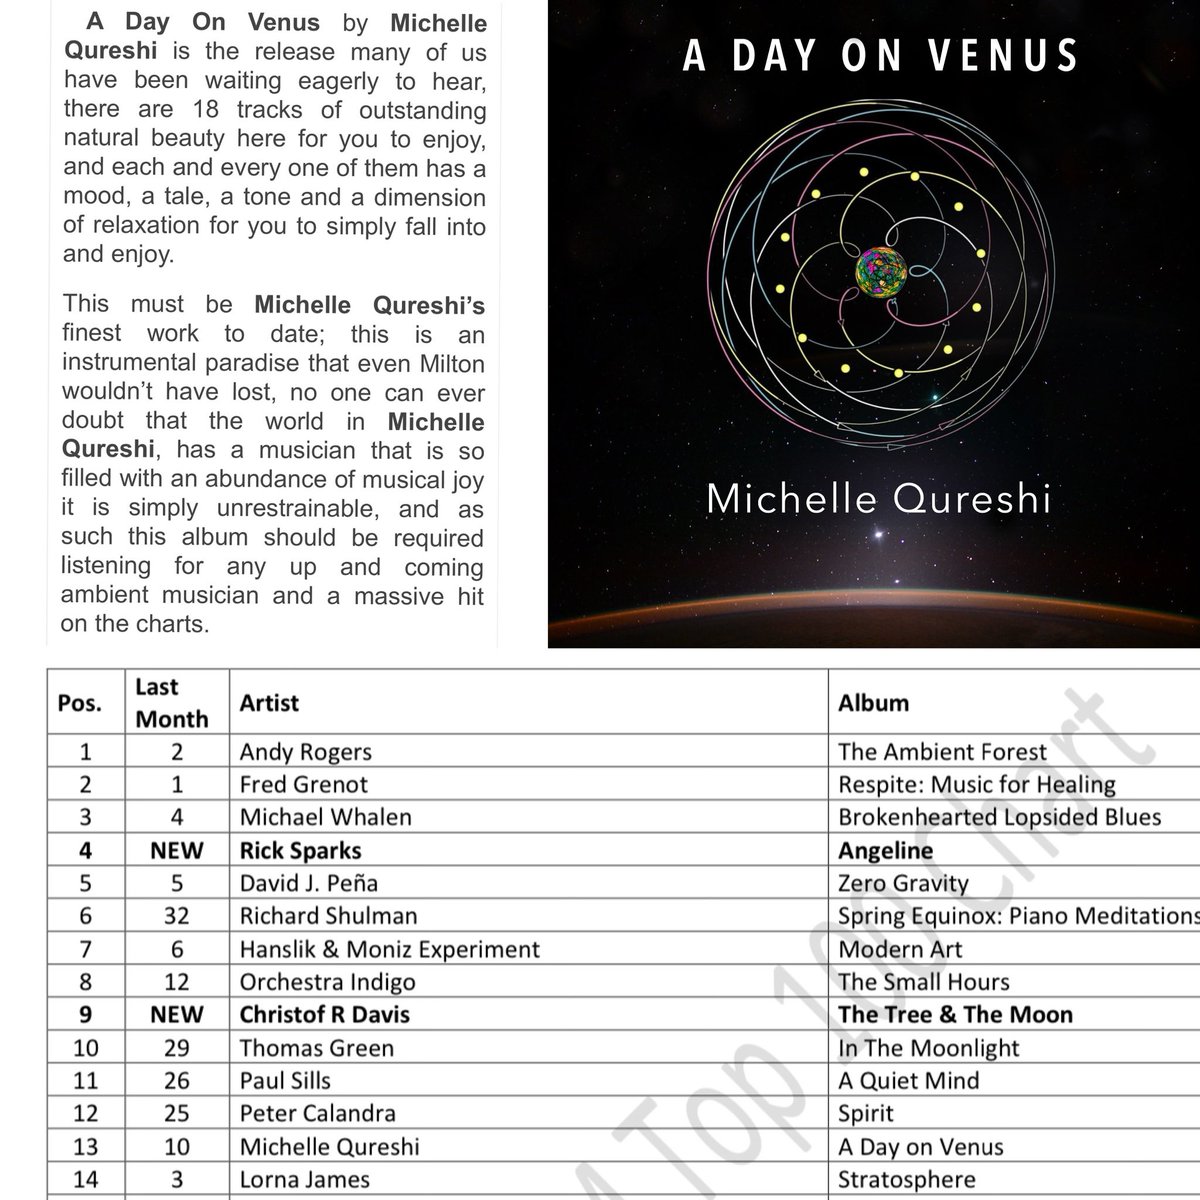 Thanks @OneWorldMusicEU for this awesome news! My January album is still in the top charts for April! A DAY ON VENUS